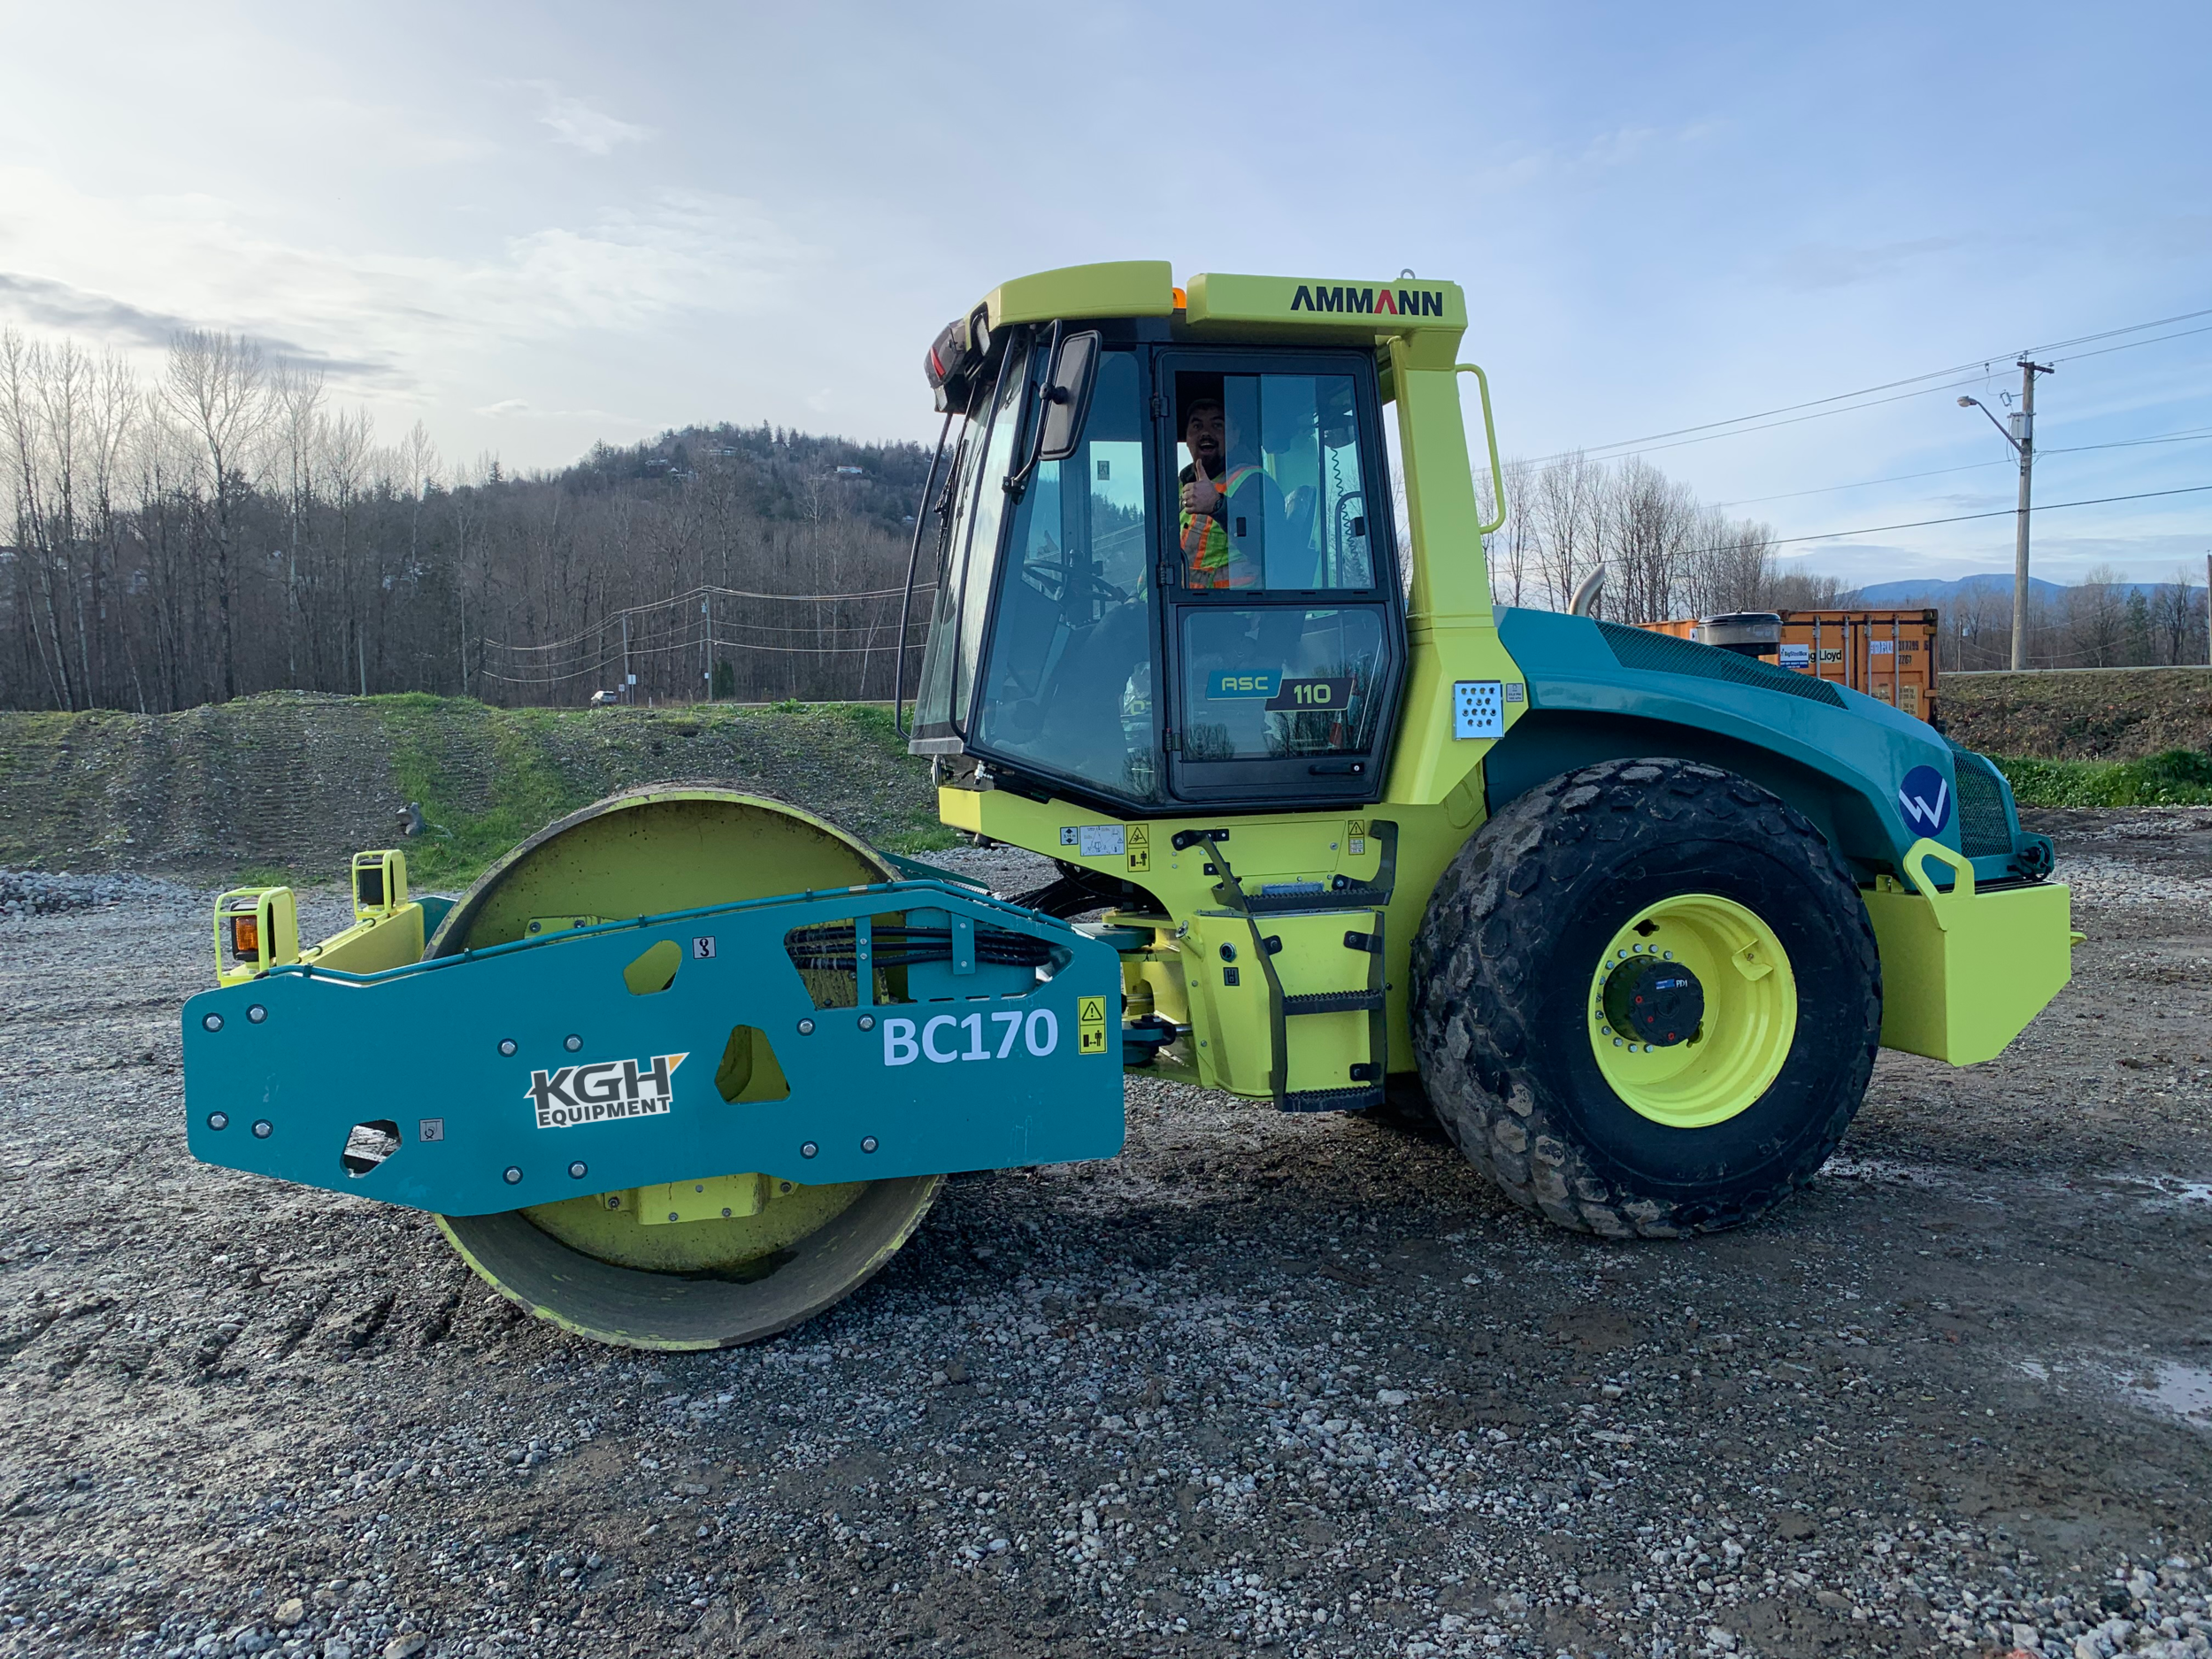 Rollers and Dozers - KGH Equipment owns a variety of sizes of rollers and dozers. They come with an operator and fuel at an hourly rate. Roller comes with optional padfoot shell. These complement the other pieces of equipment to assist in clearing or fill pad installation.   